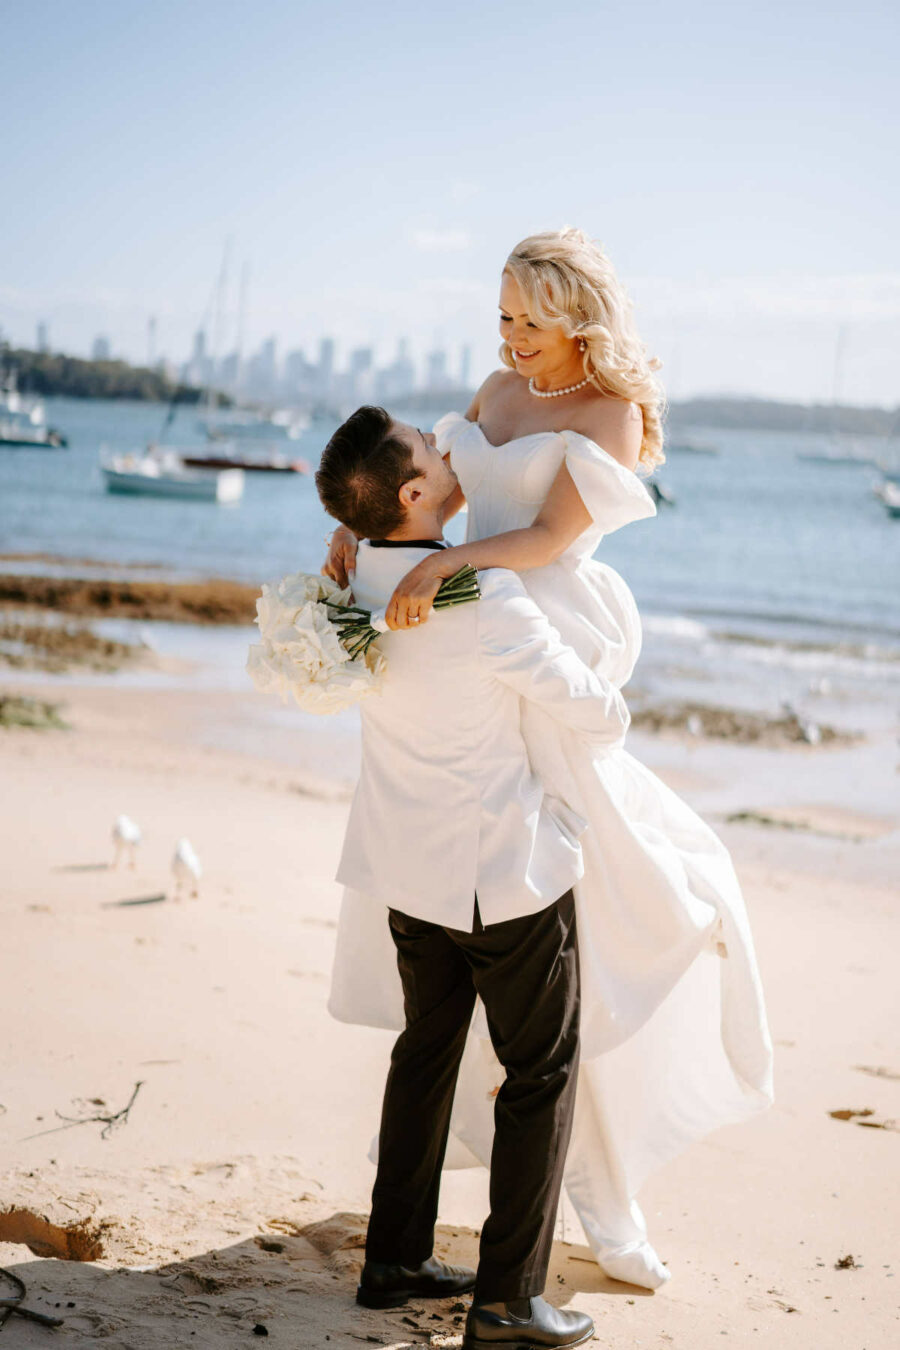 Wedding Cash Giveaway winners, Tayla and Anderson, at their Watsons Bay Hotel wedding. Photo by Veri Photography.